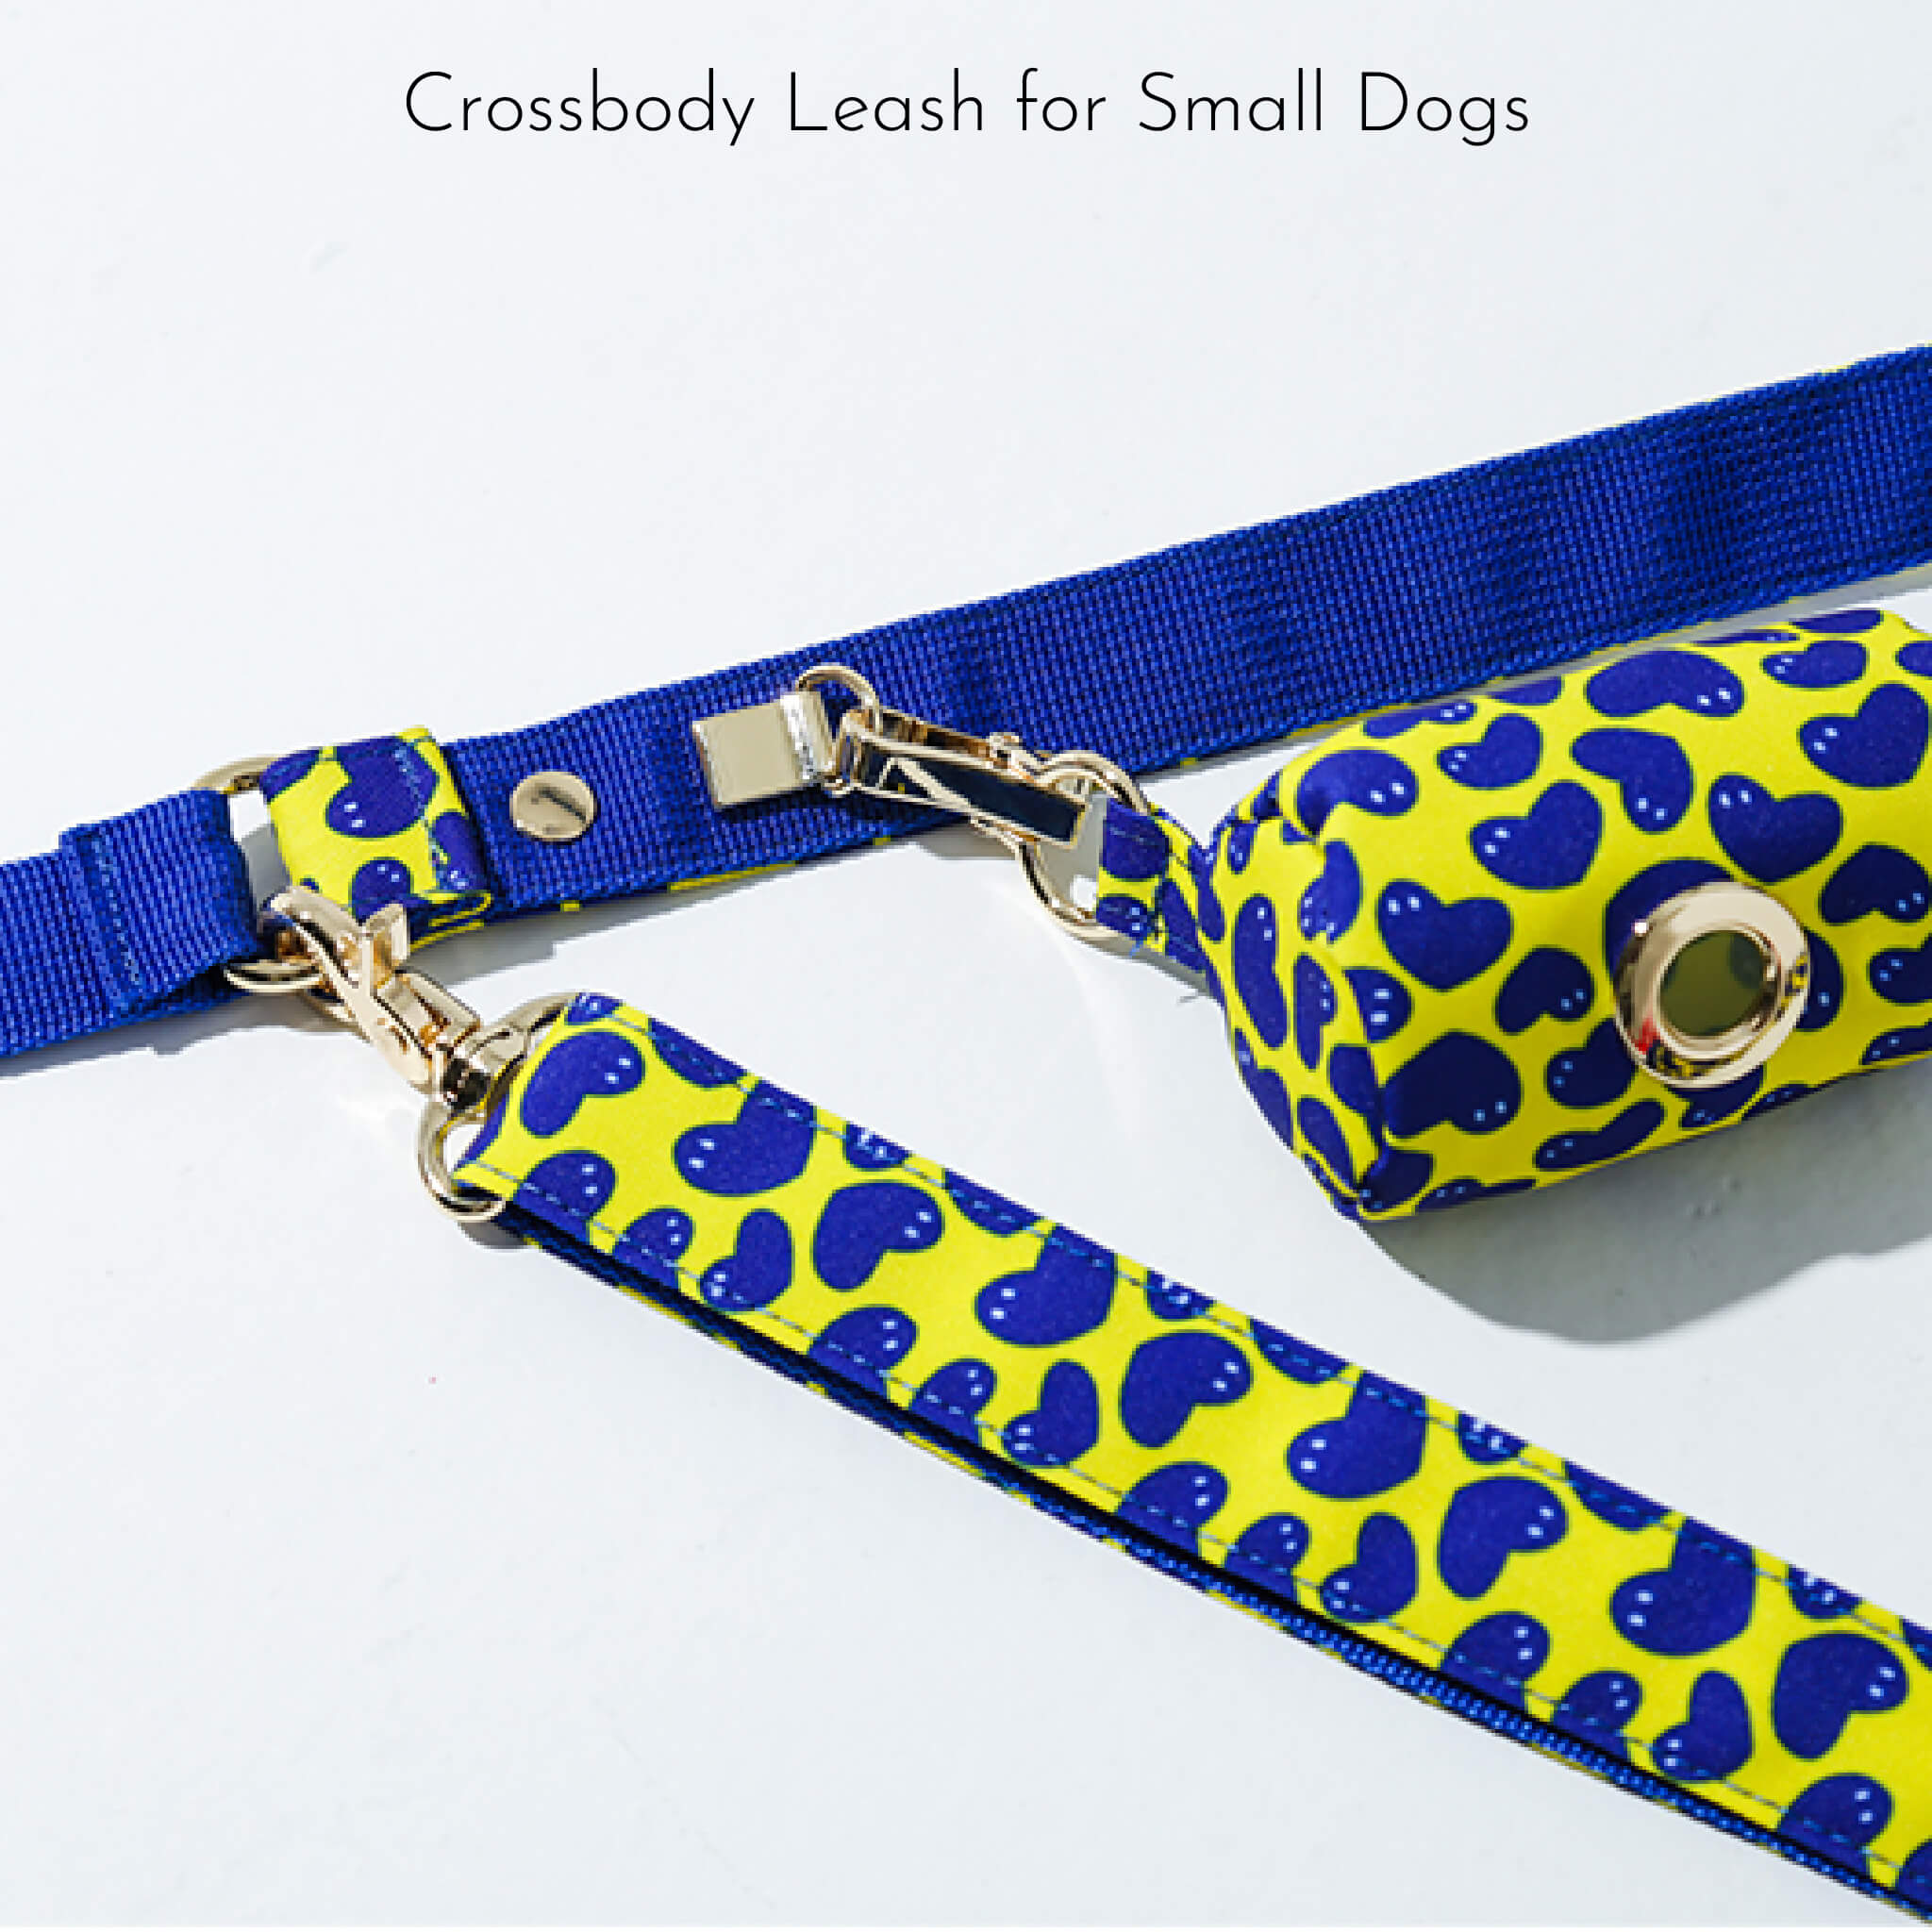 crossbody leash for small dogs